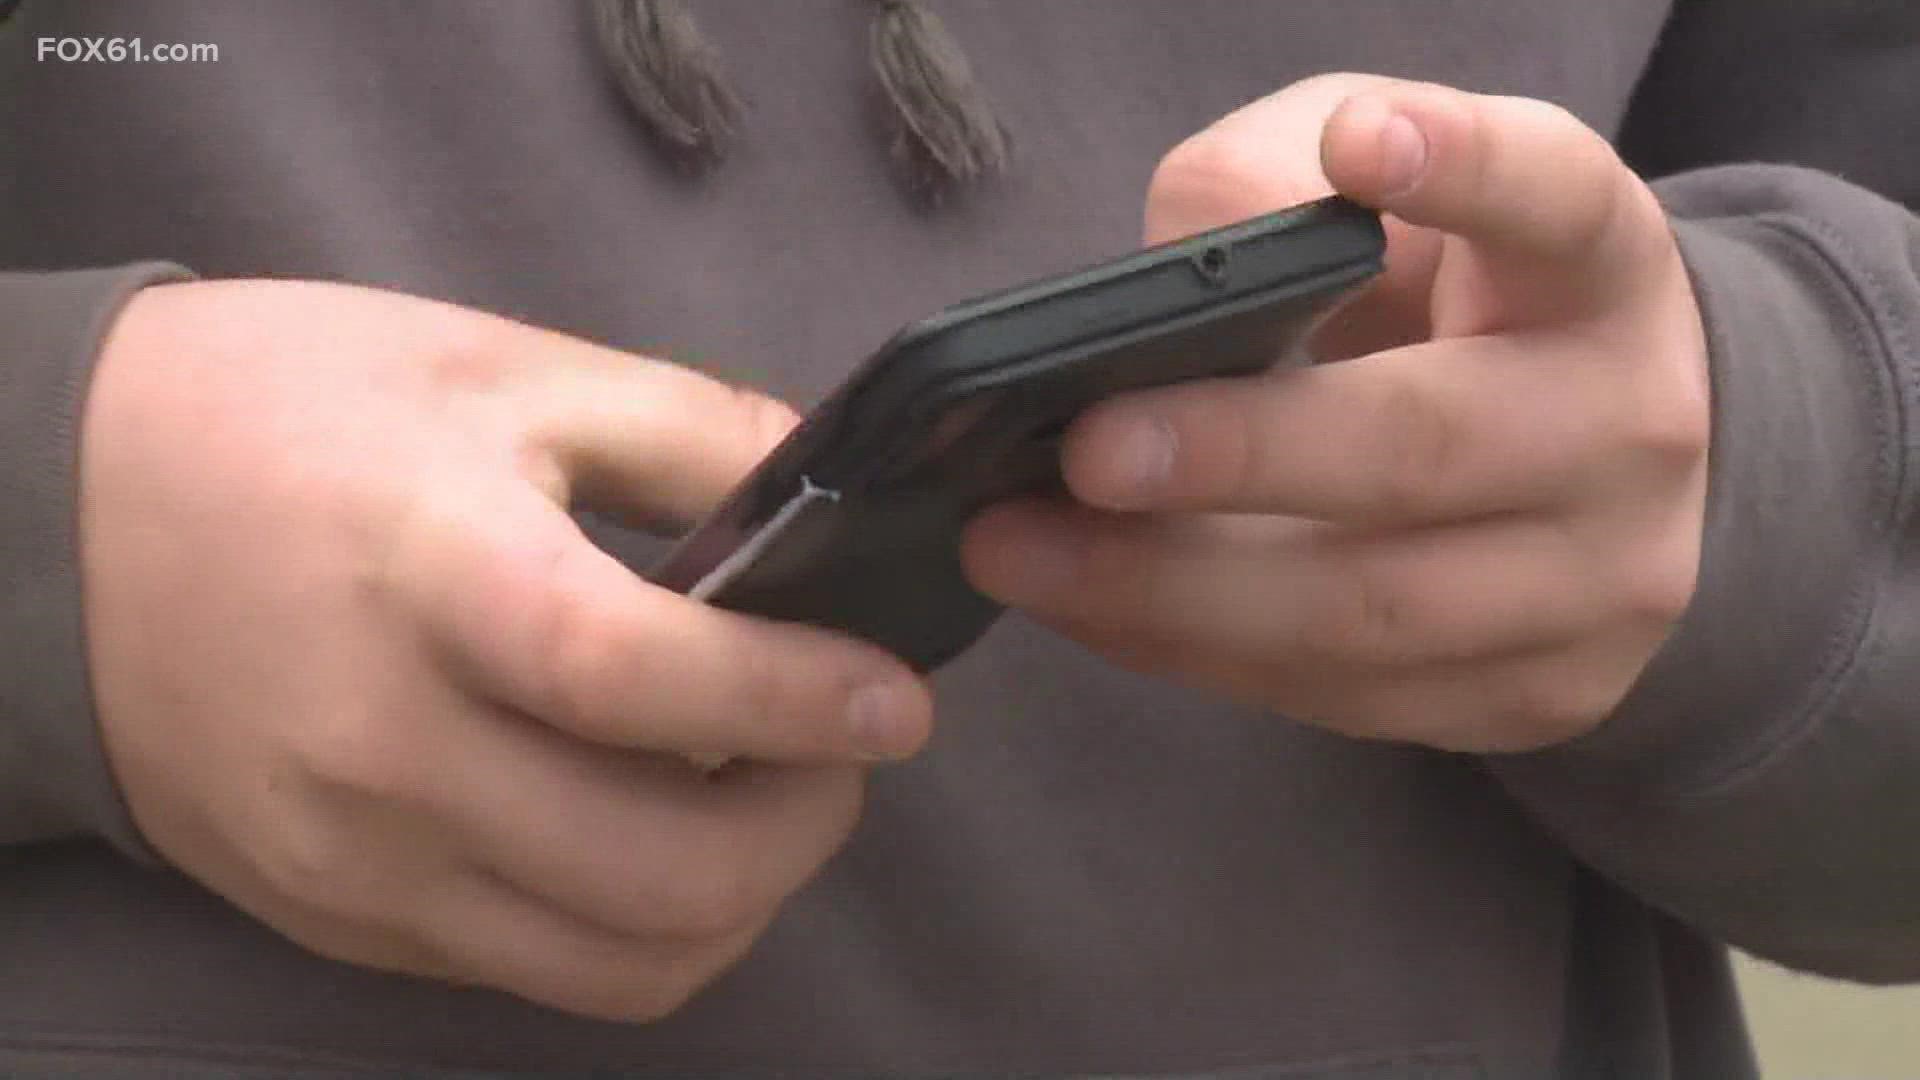 Connecticut lawmakers are trying to pass legislation in Congress that aims to protect kids on social media.